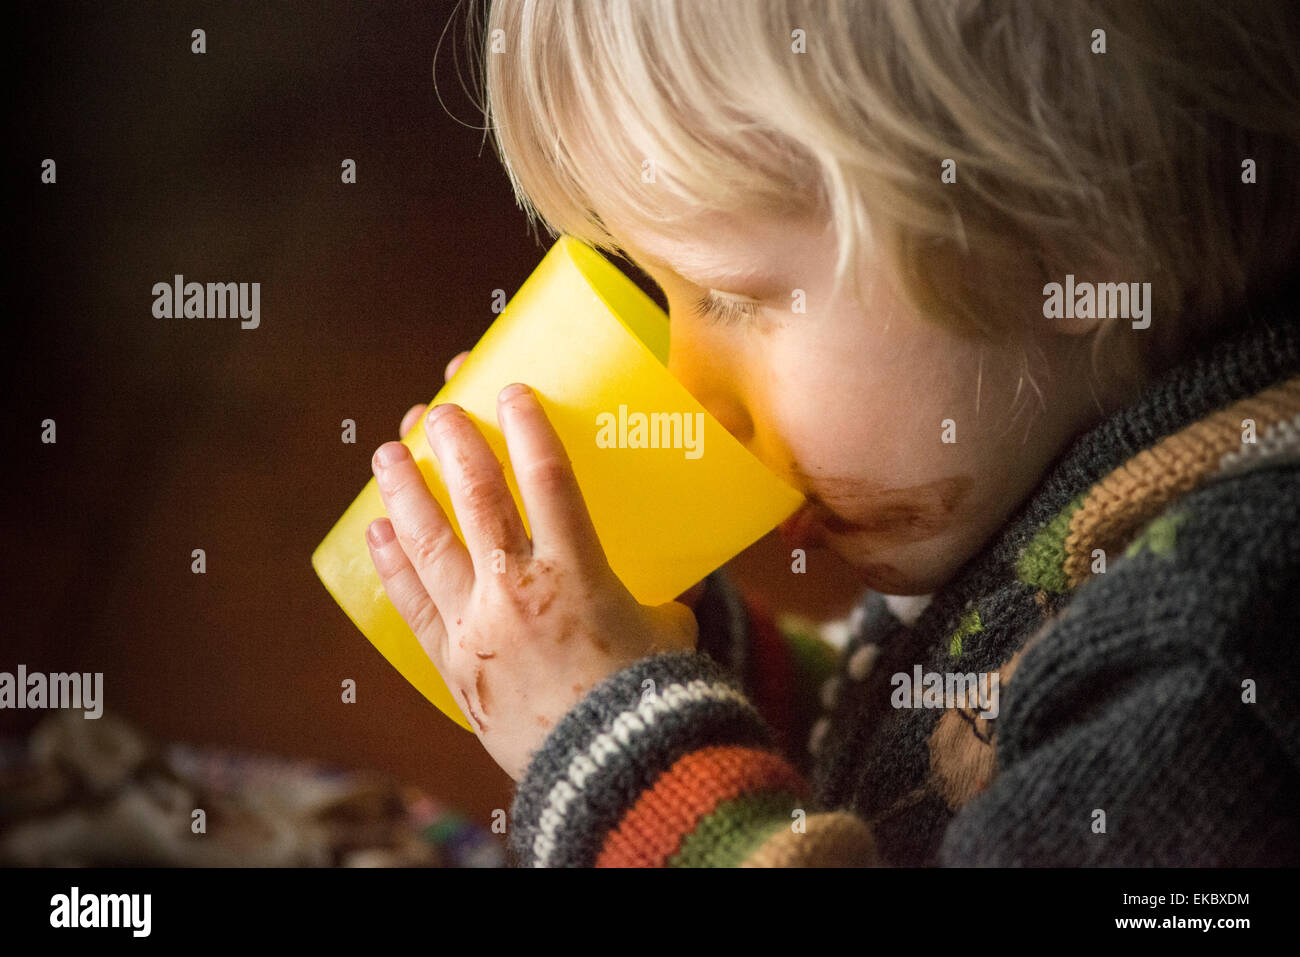 Portrait of young boy drinking from beaker Stock Photo